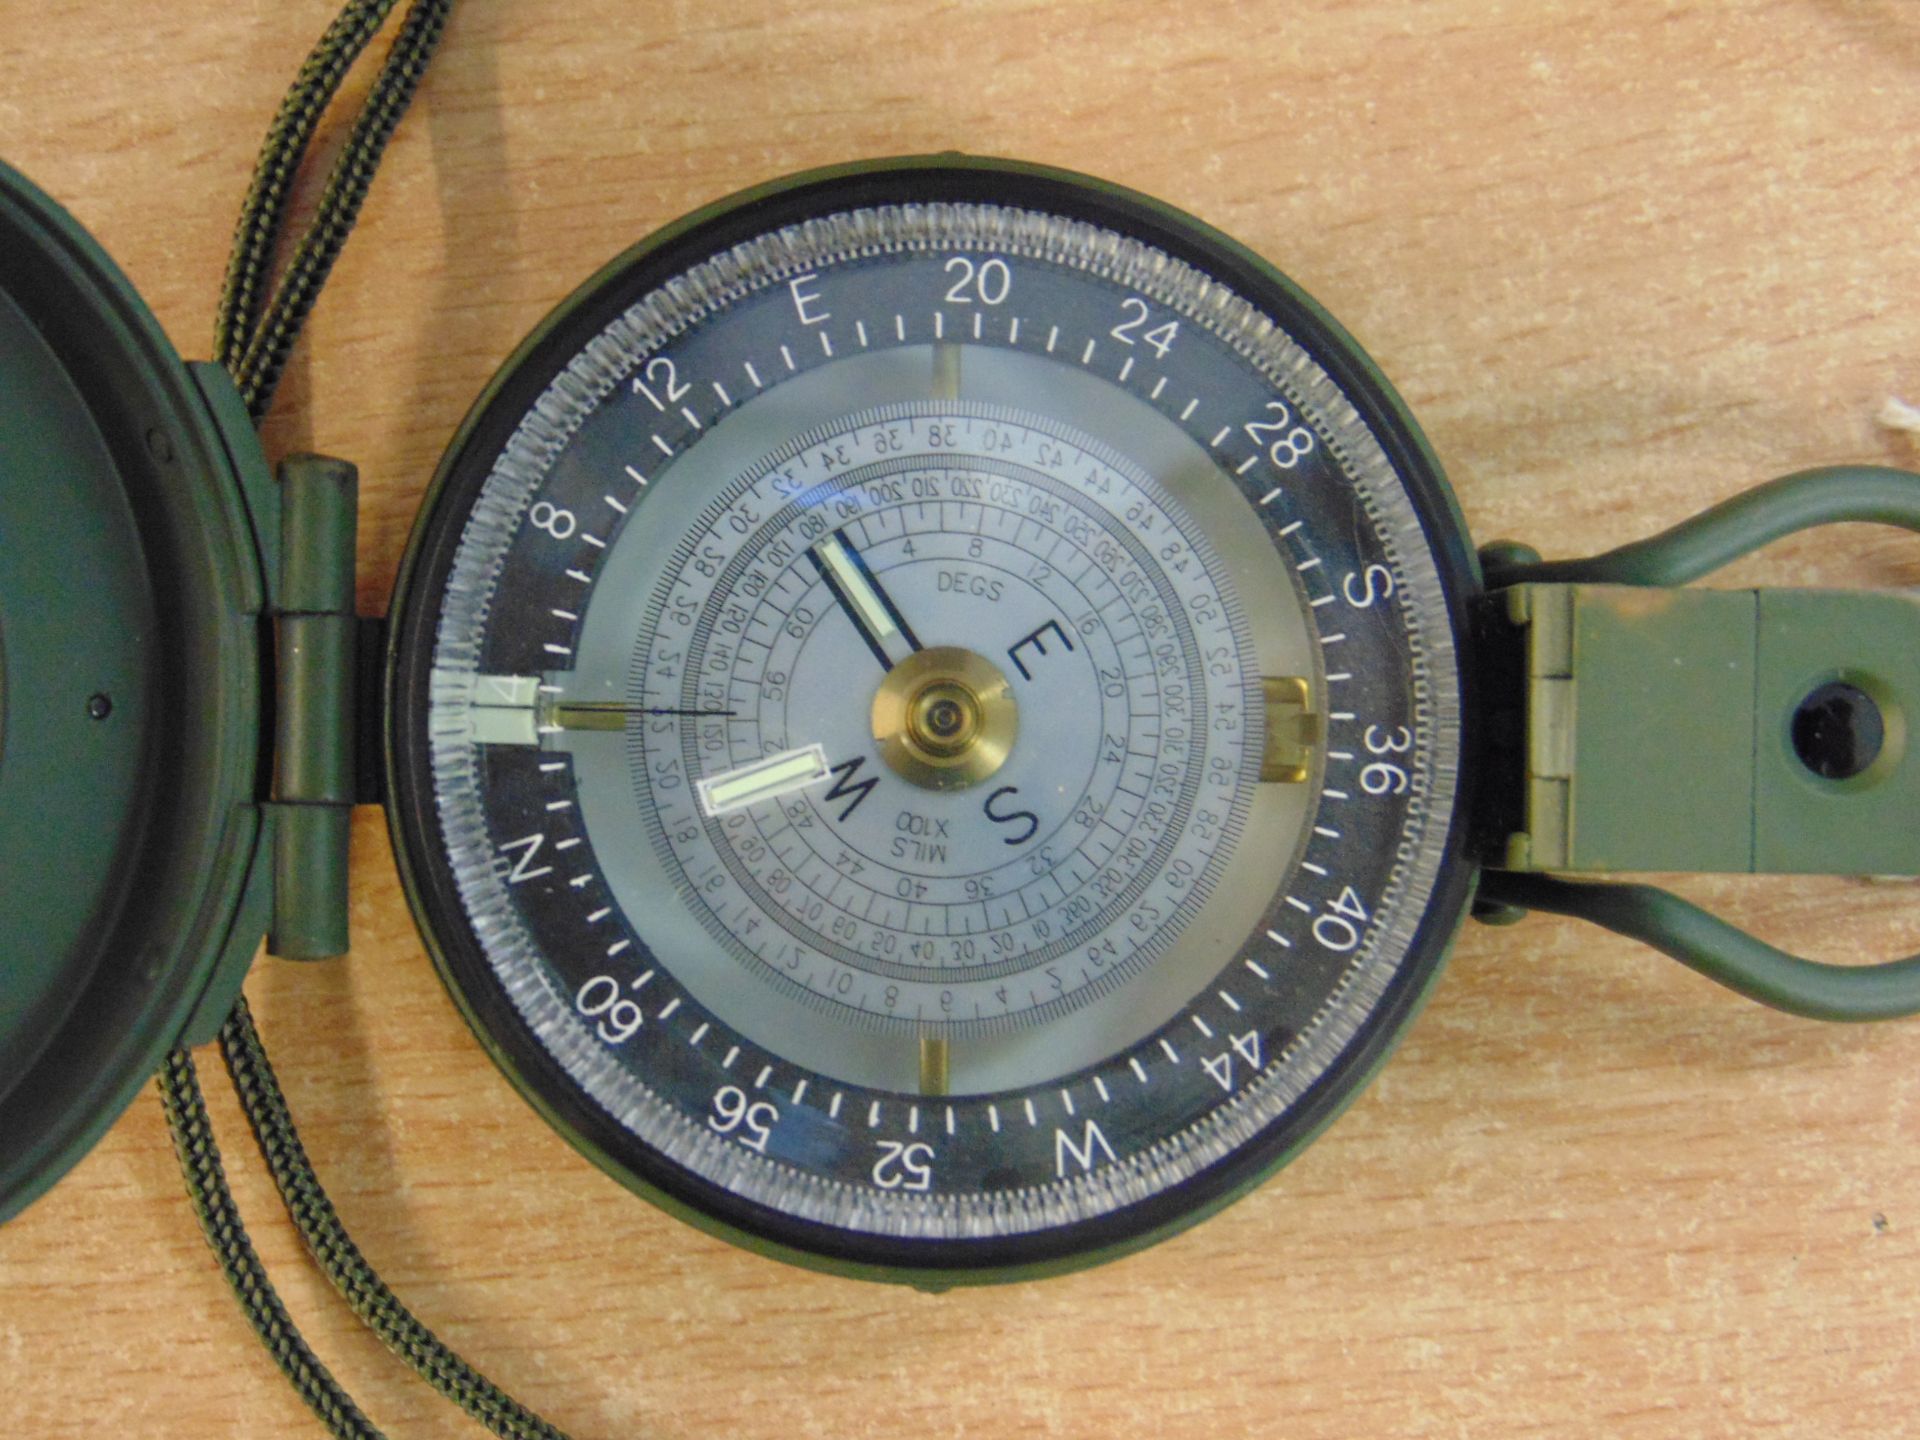 NEW UNISSUED FRANCIS BARKER M88 PRISMATIC COMPASS - Image 5 of 6